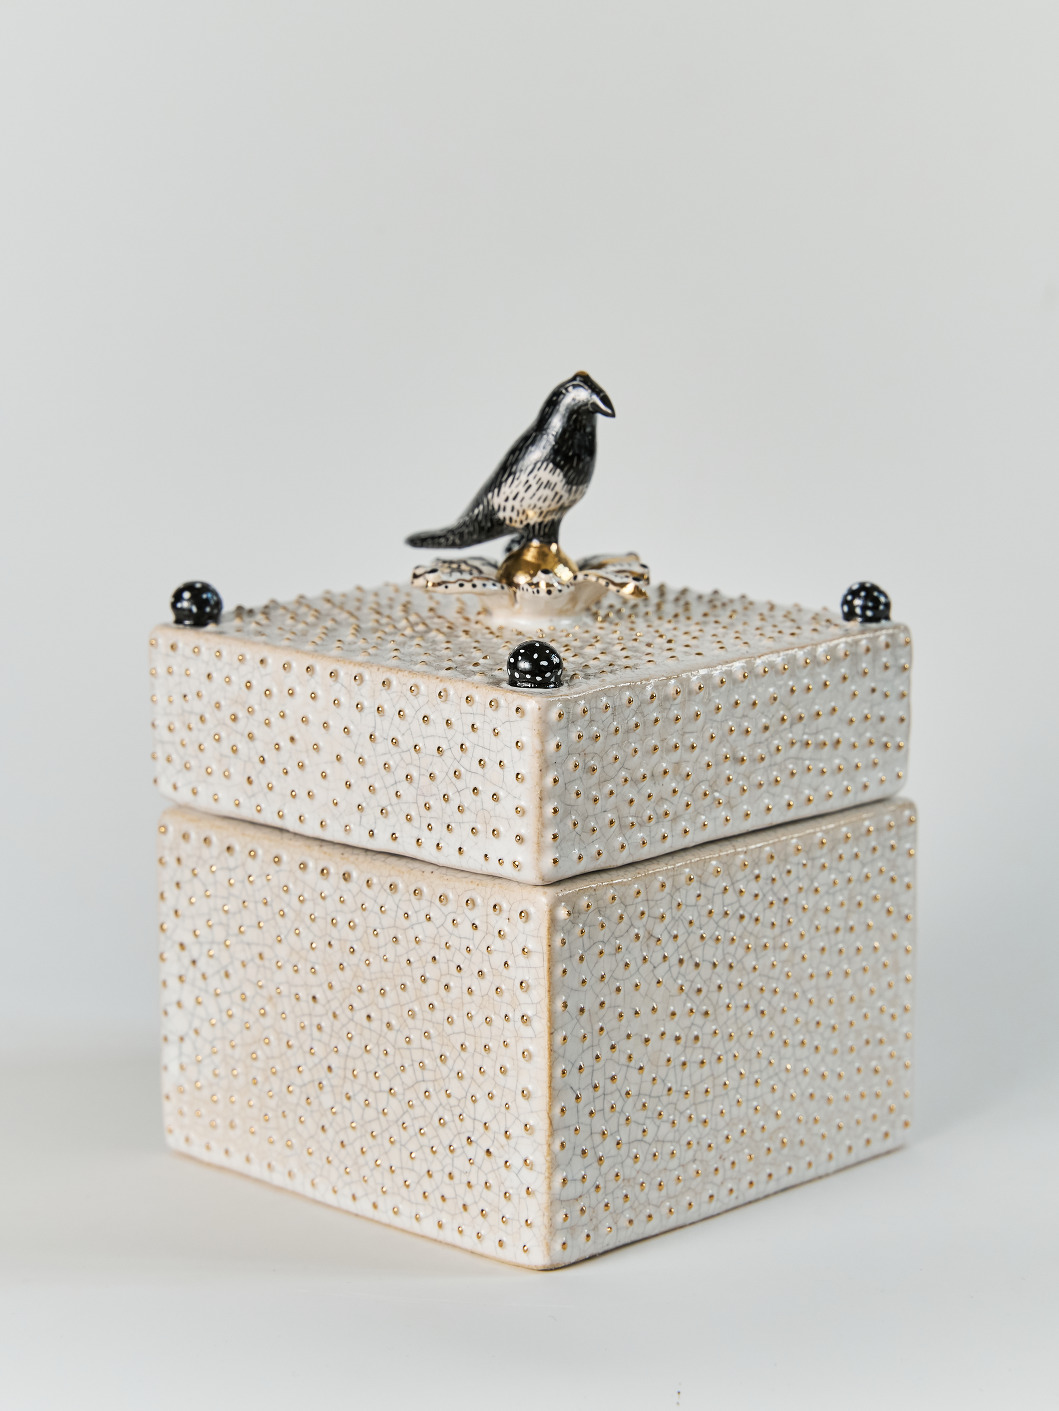 A casket with a White-sided Magpie